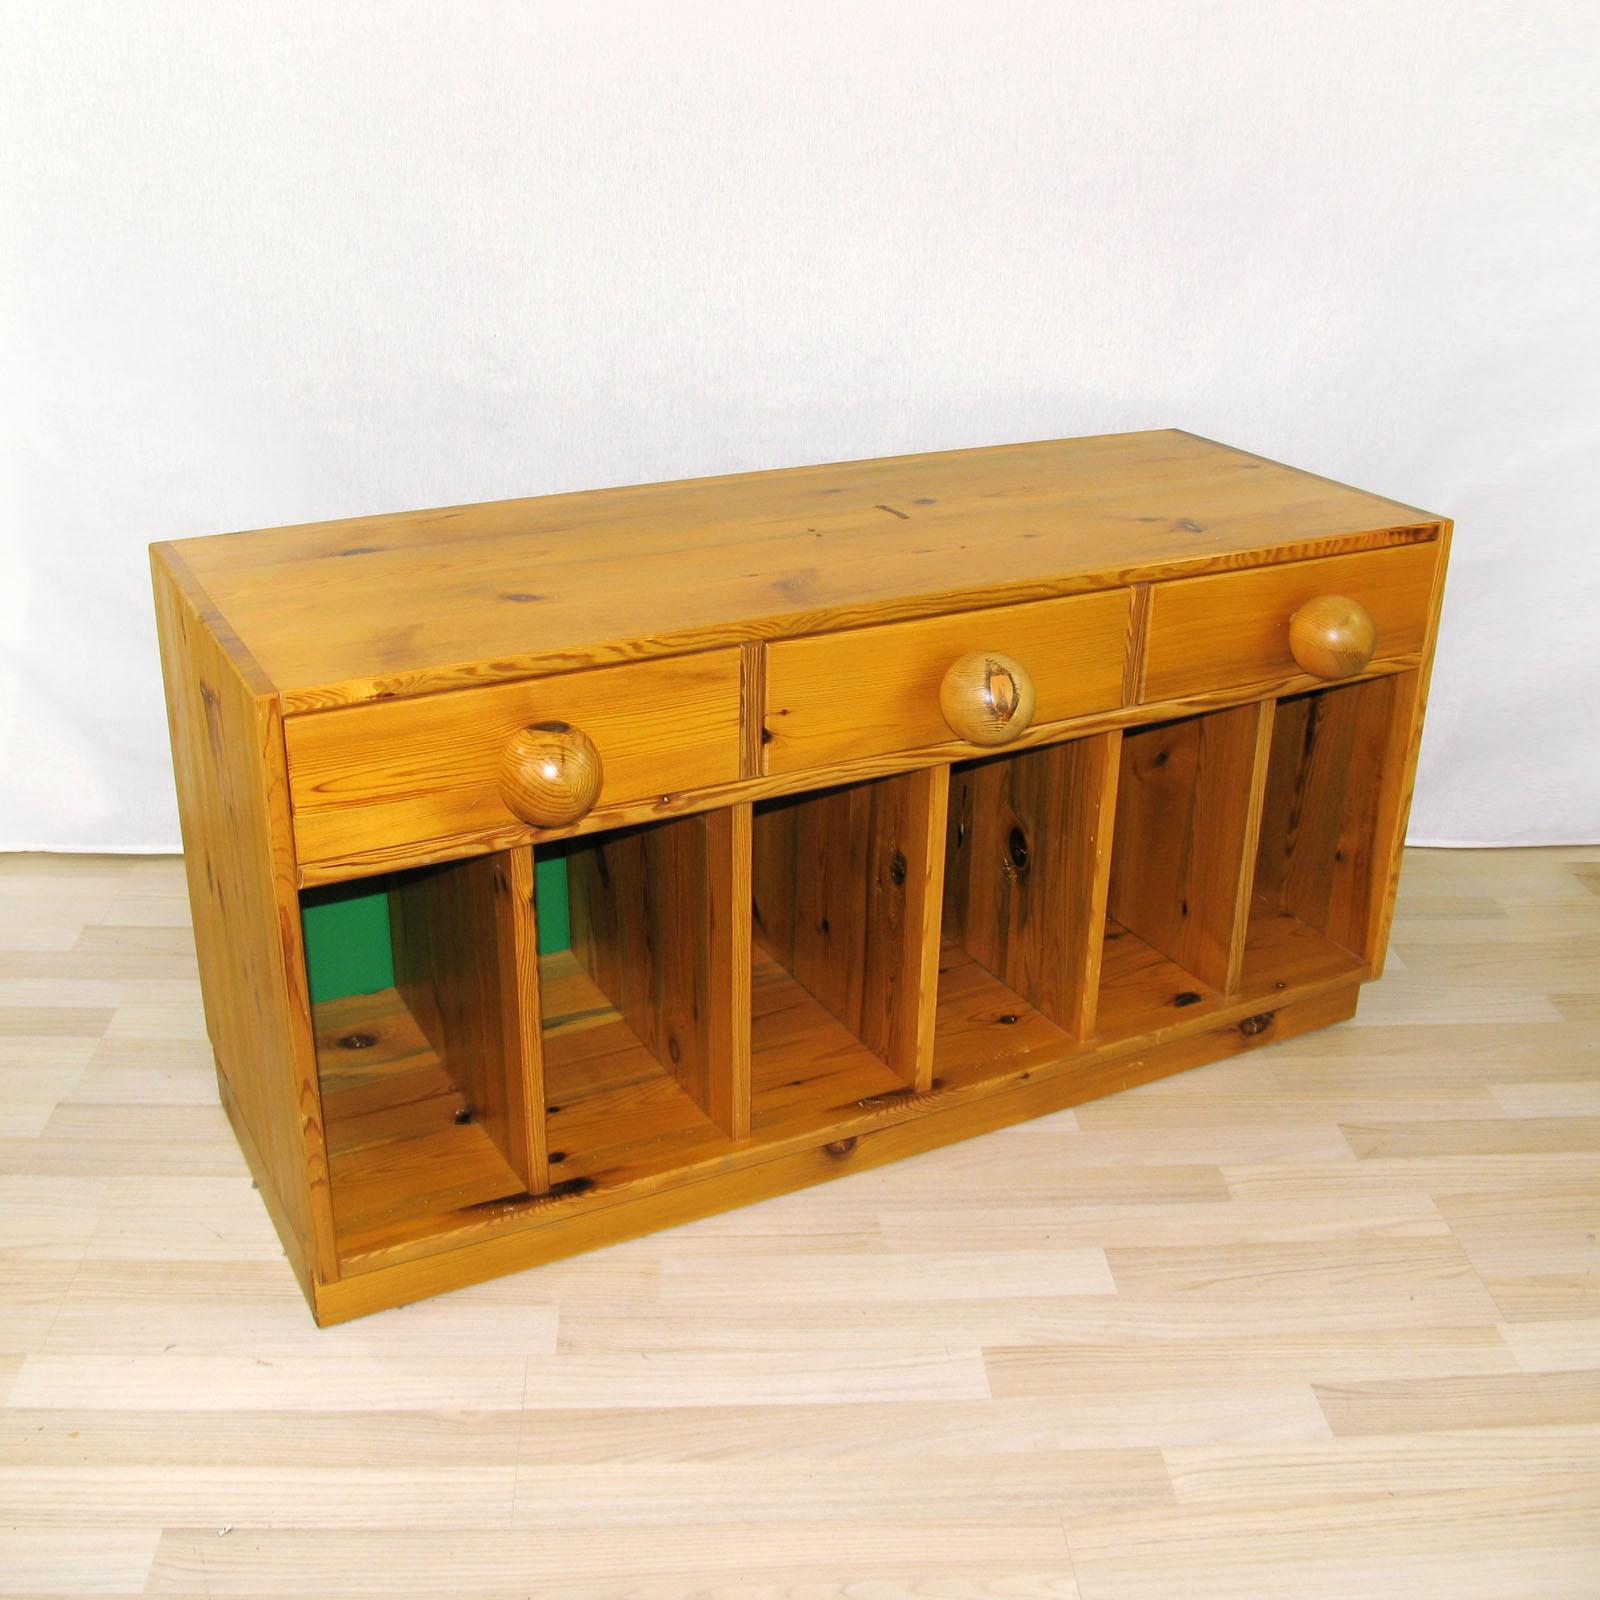 Scandinavian Modern Small Pine Sideboard by Sven Larsson, Sweden 1970s For Sale